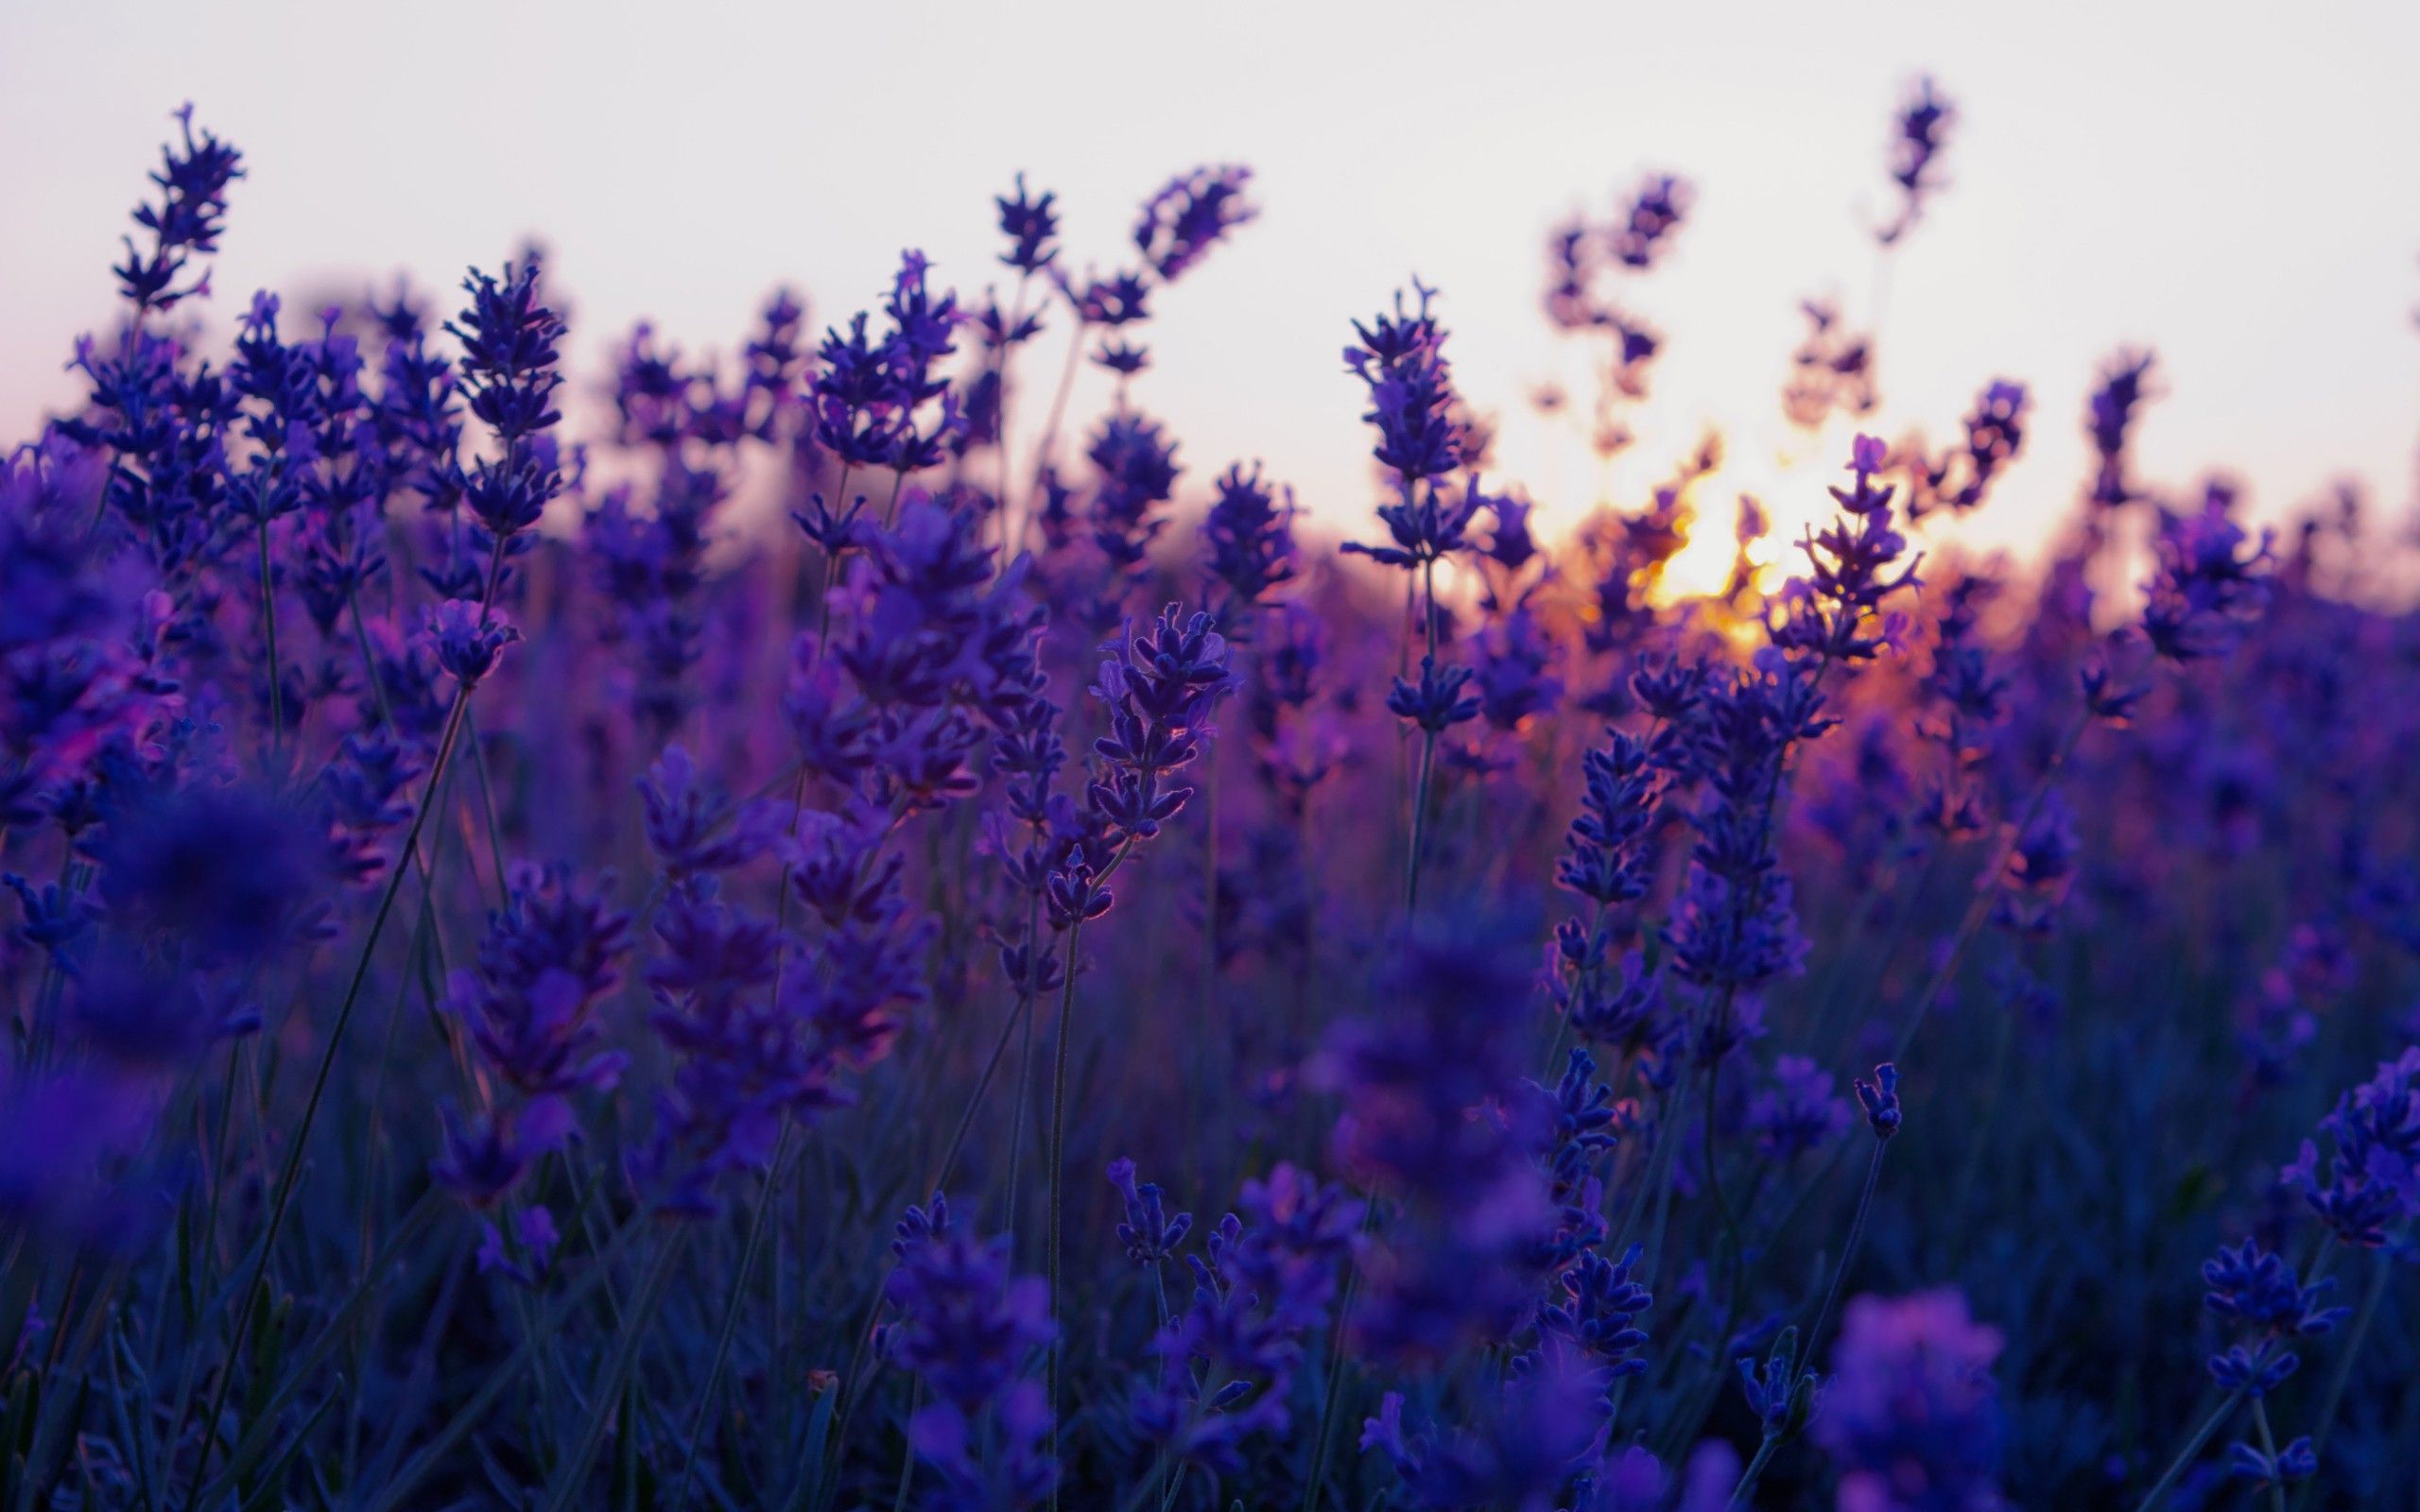 A field of lavender flowers at sunset - Chromebook